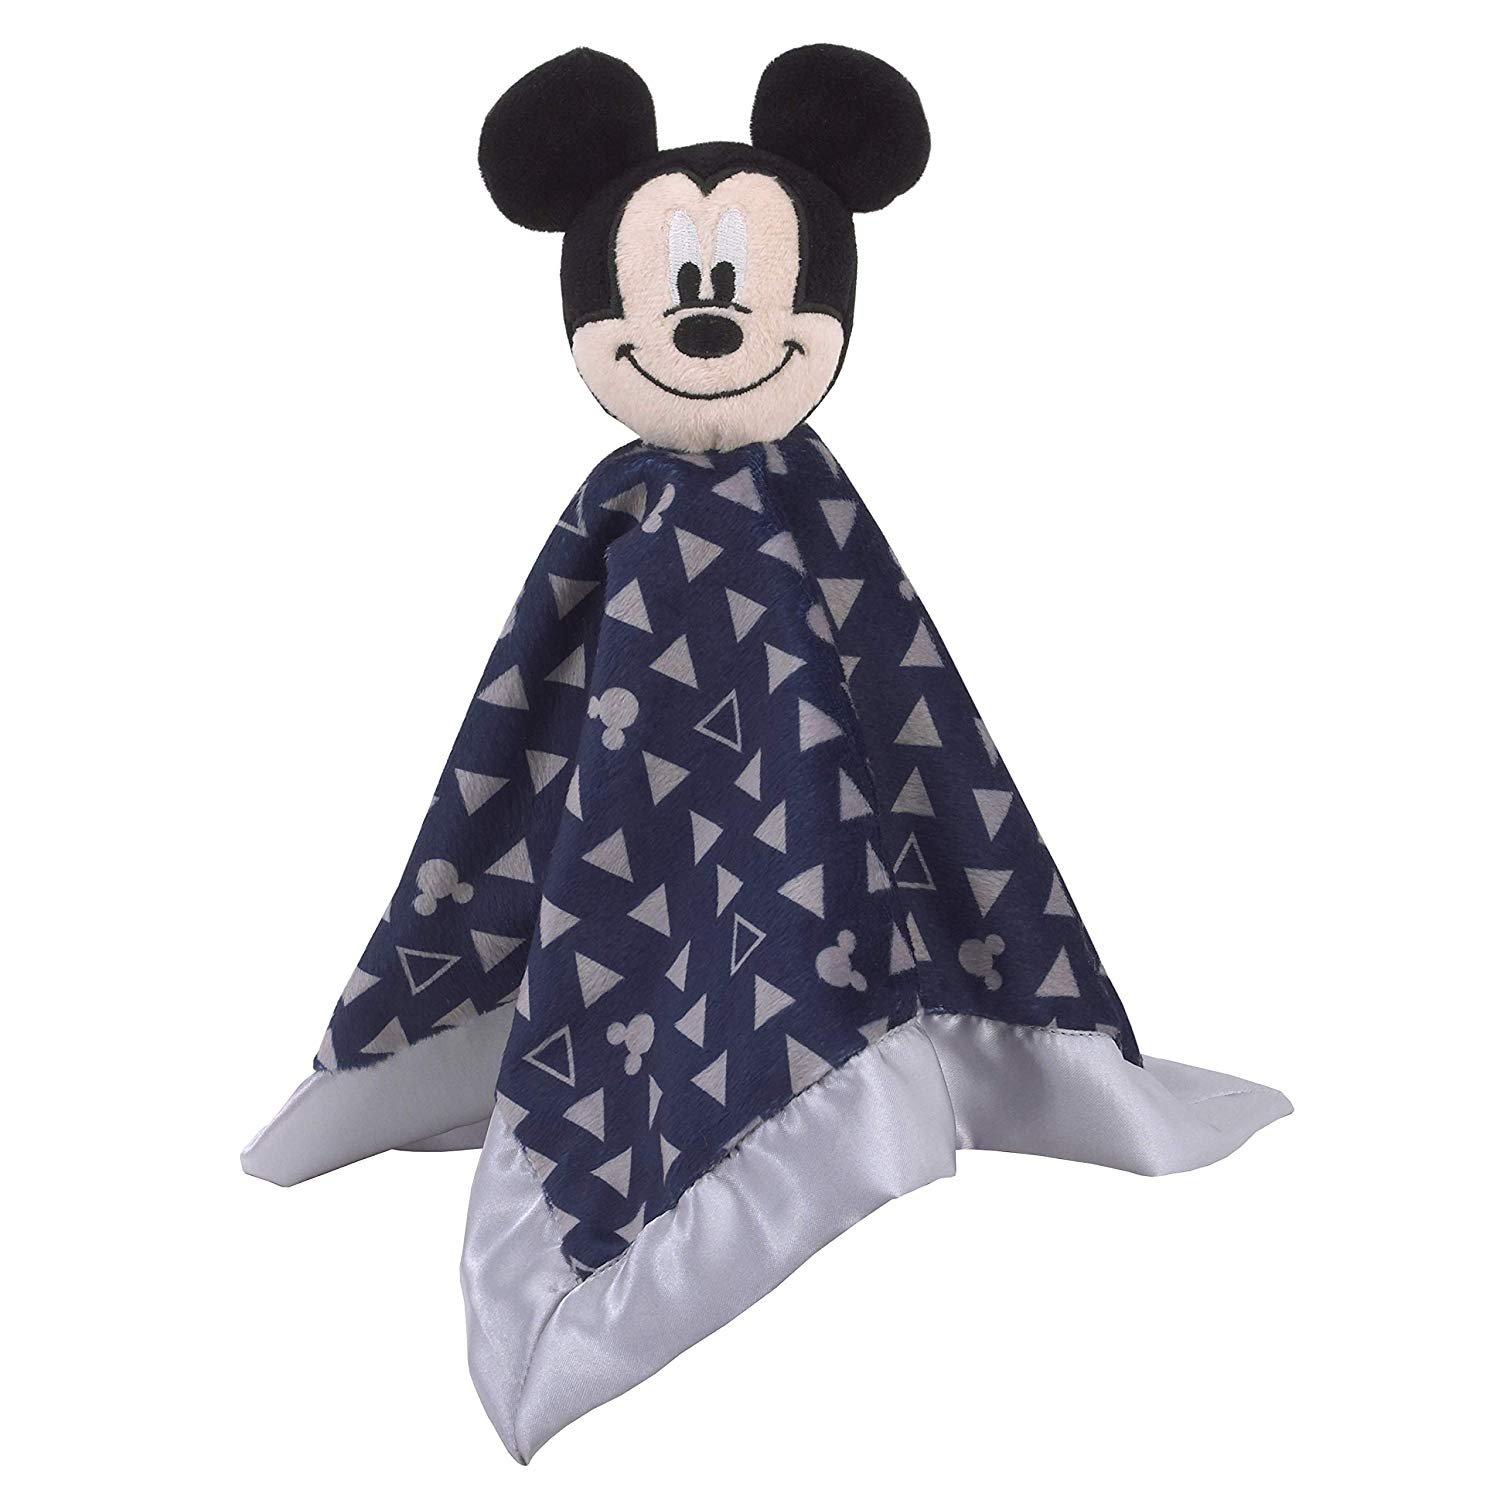 Disney Mickey Mouse Lovey Security Blanket, Navy/Grey - image 1 of 4